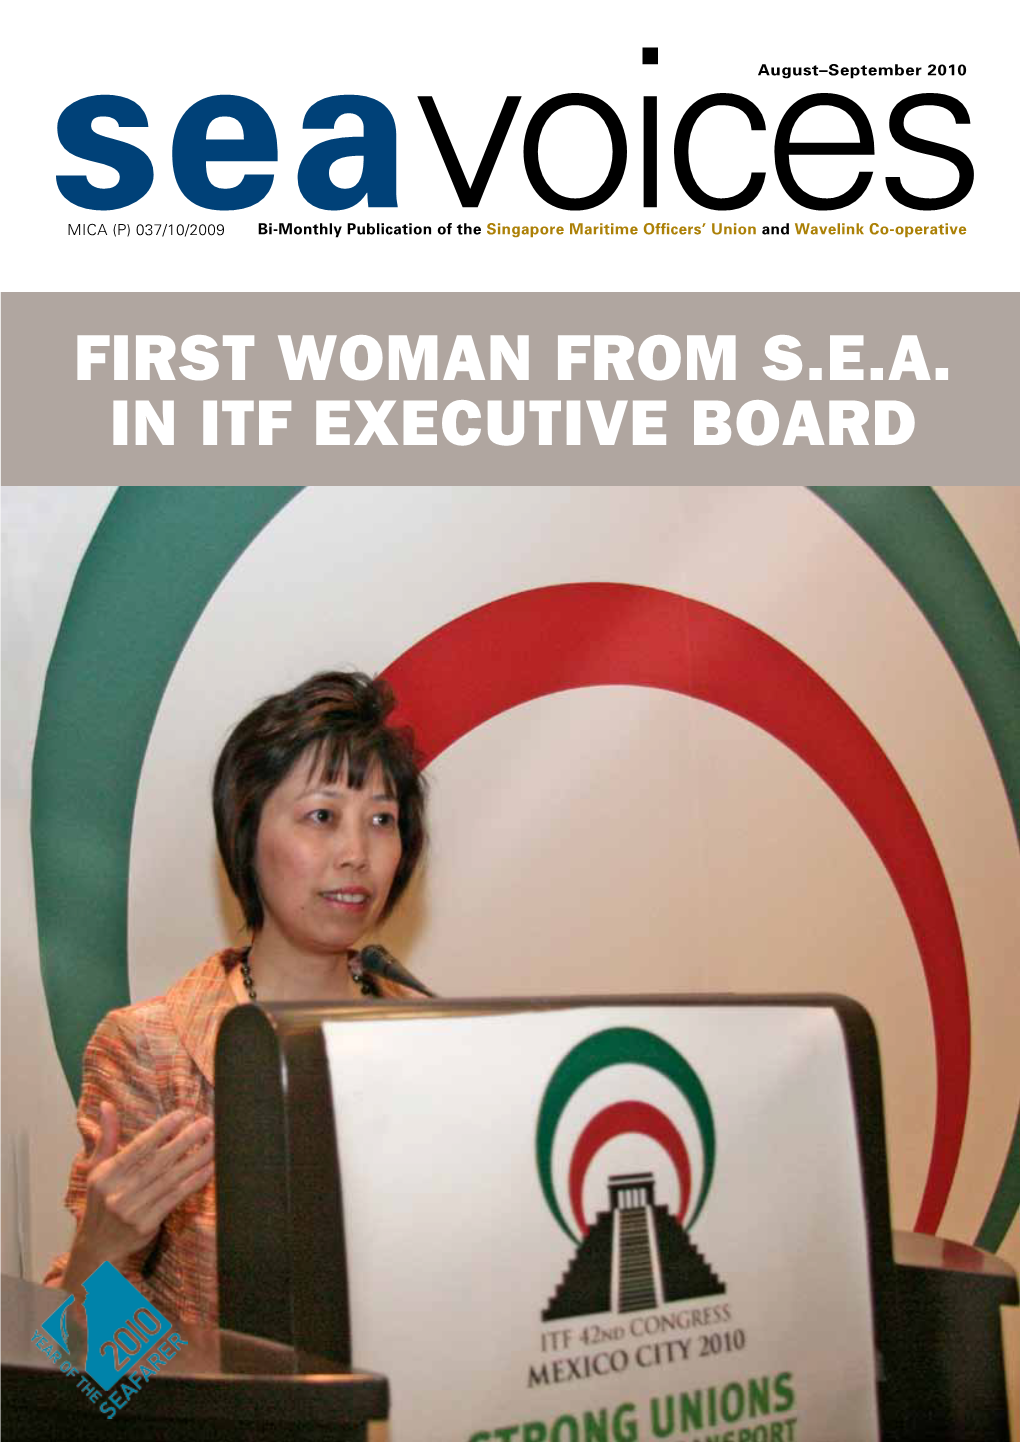 First Woman from S.E.A. in Itf Executive Board CONTENTS